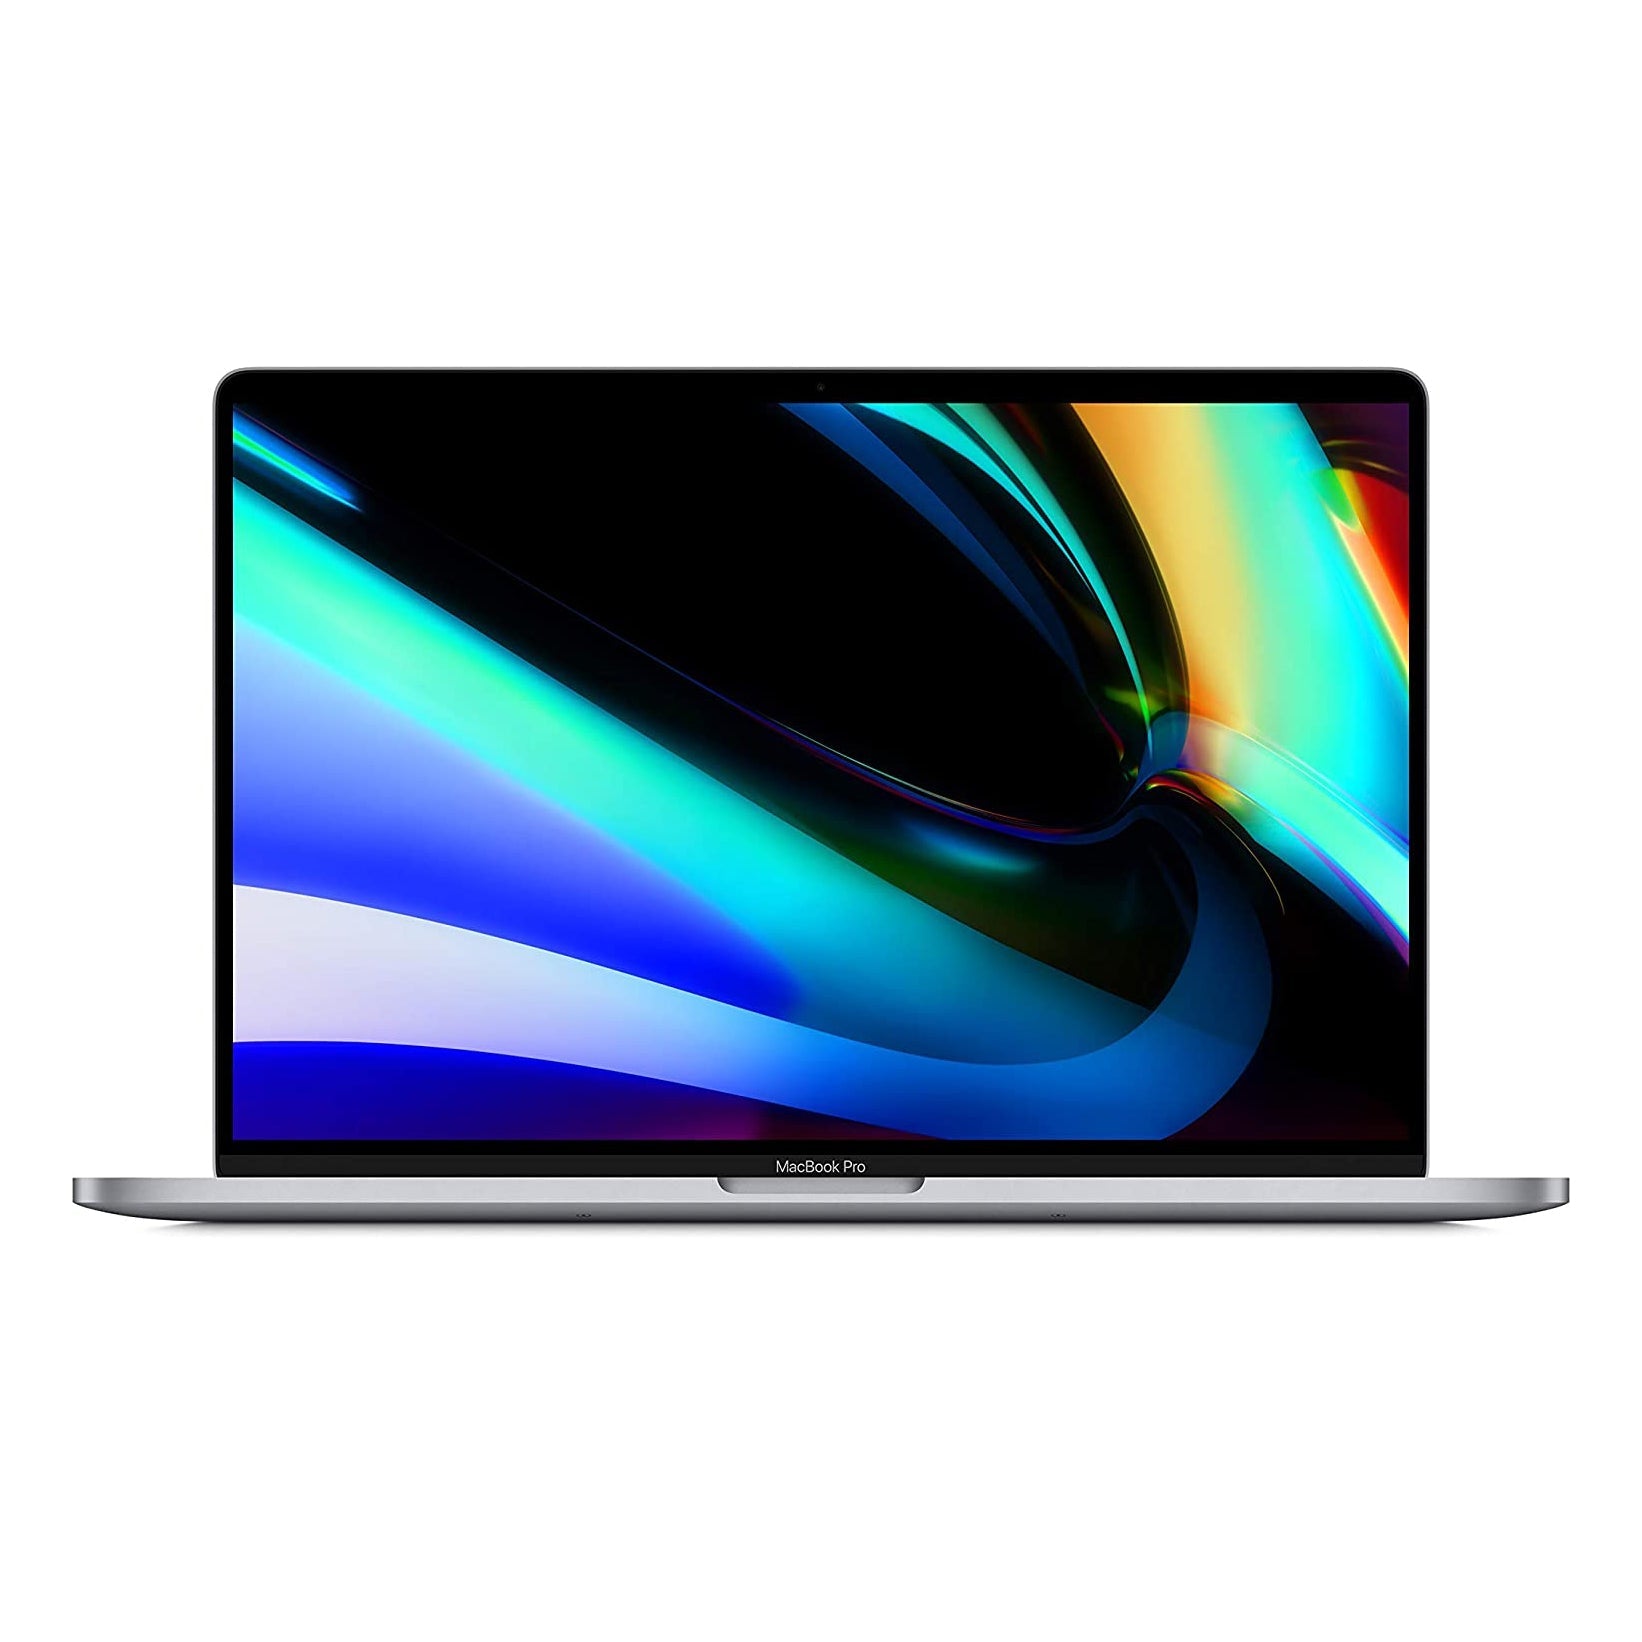 Apple MacBook Pro 16" with Touch Bar (2.30 Ghz 8 Core i9 / 32GB / 1TB / 5500M 8GB) - 2019, Space Gray - Nyson Retail